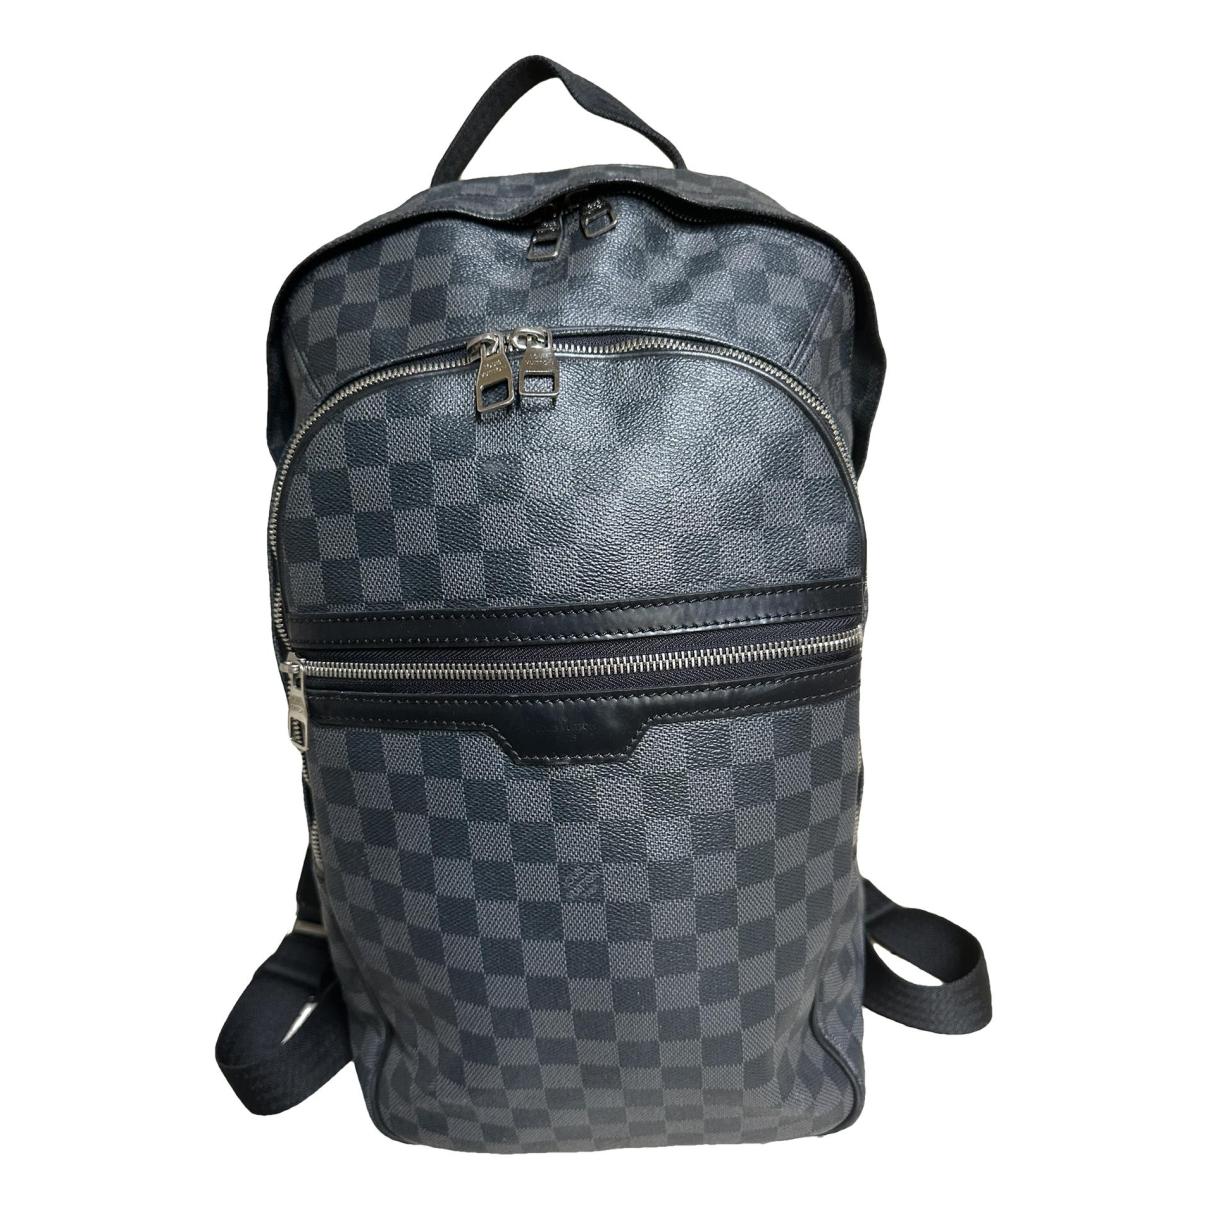 Apollo backpack leather weekend bag Louis Vuitton Black in Leather -  24536338